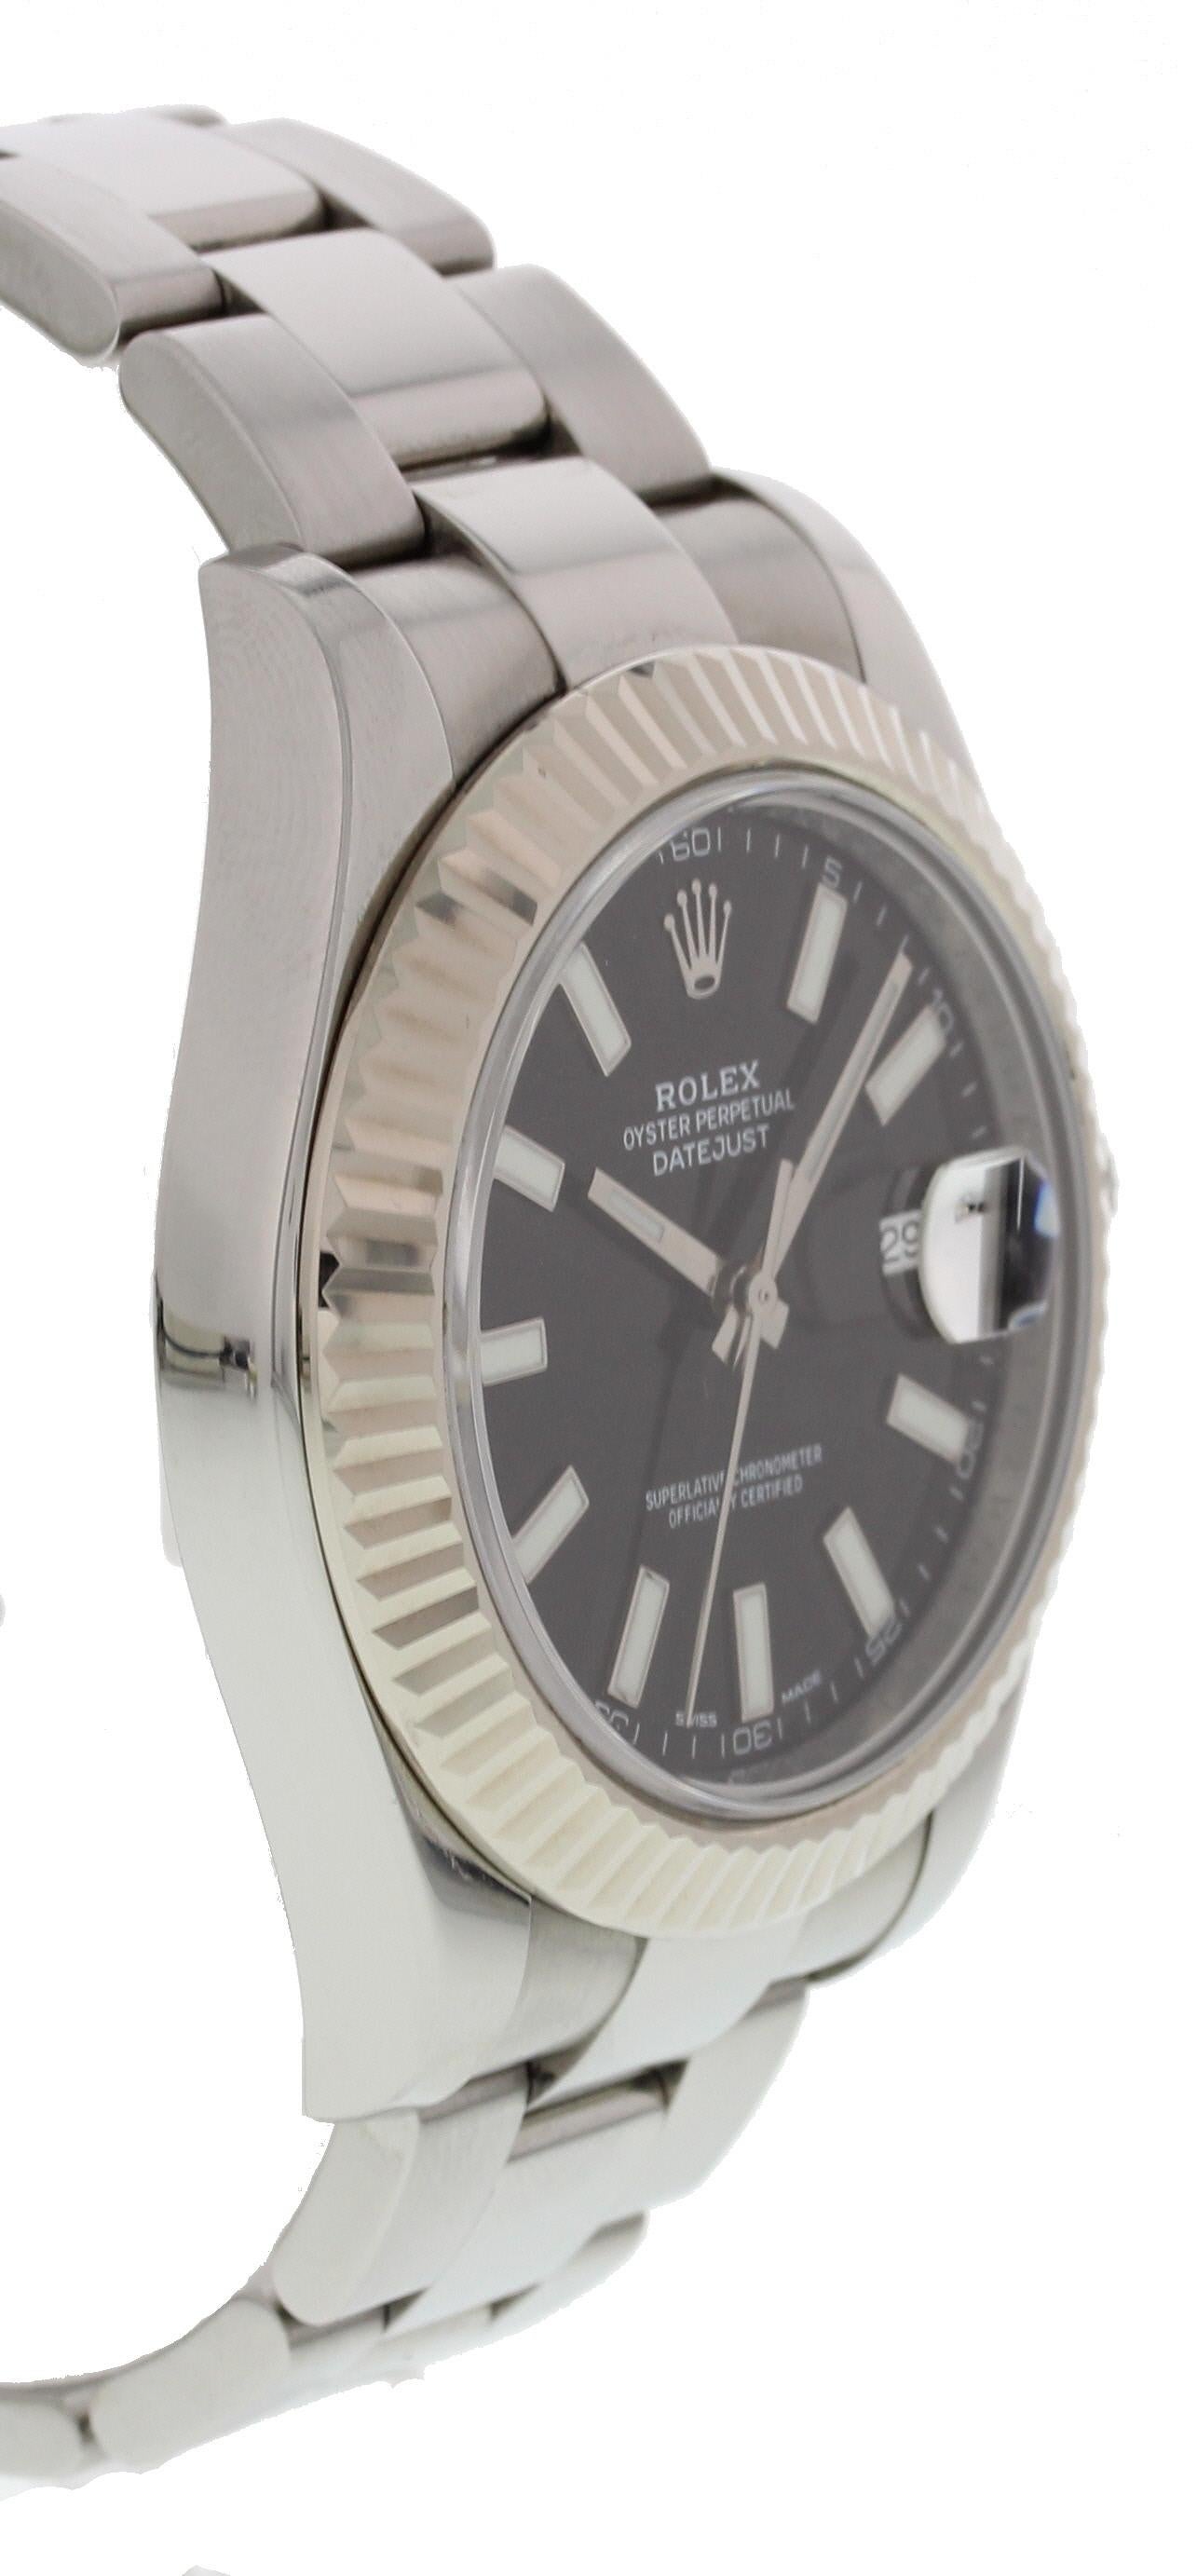 Rolex Oyster Perpetual Datejust II 116334 Black Dial In Excellent Condition For Sale In New York, NY